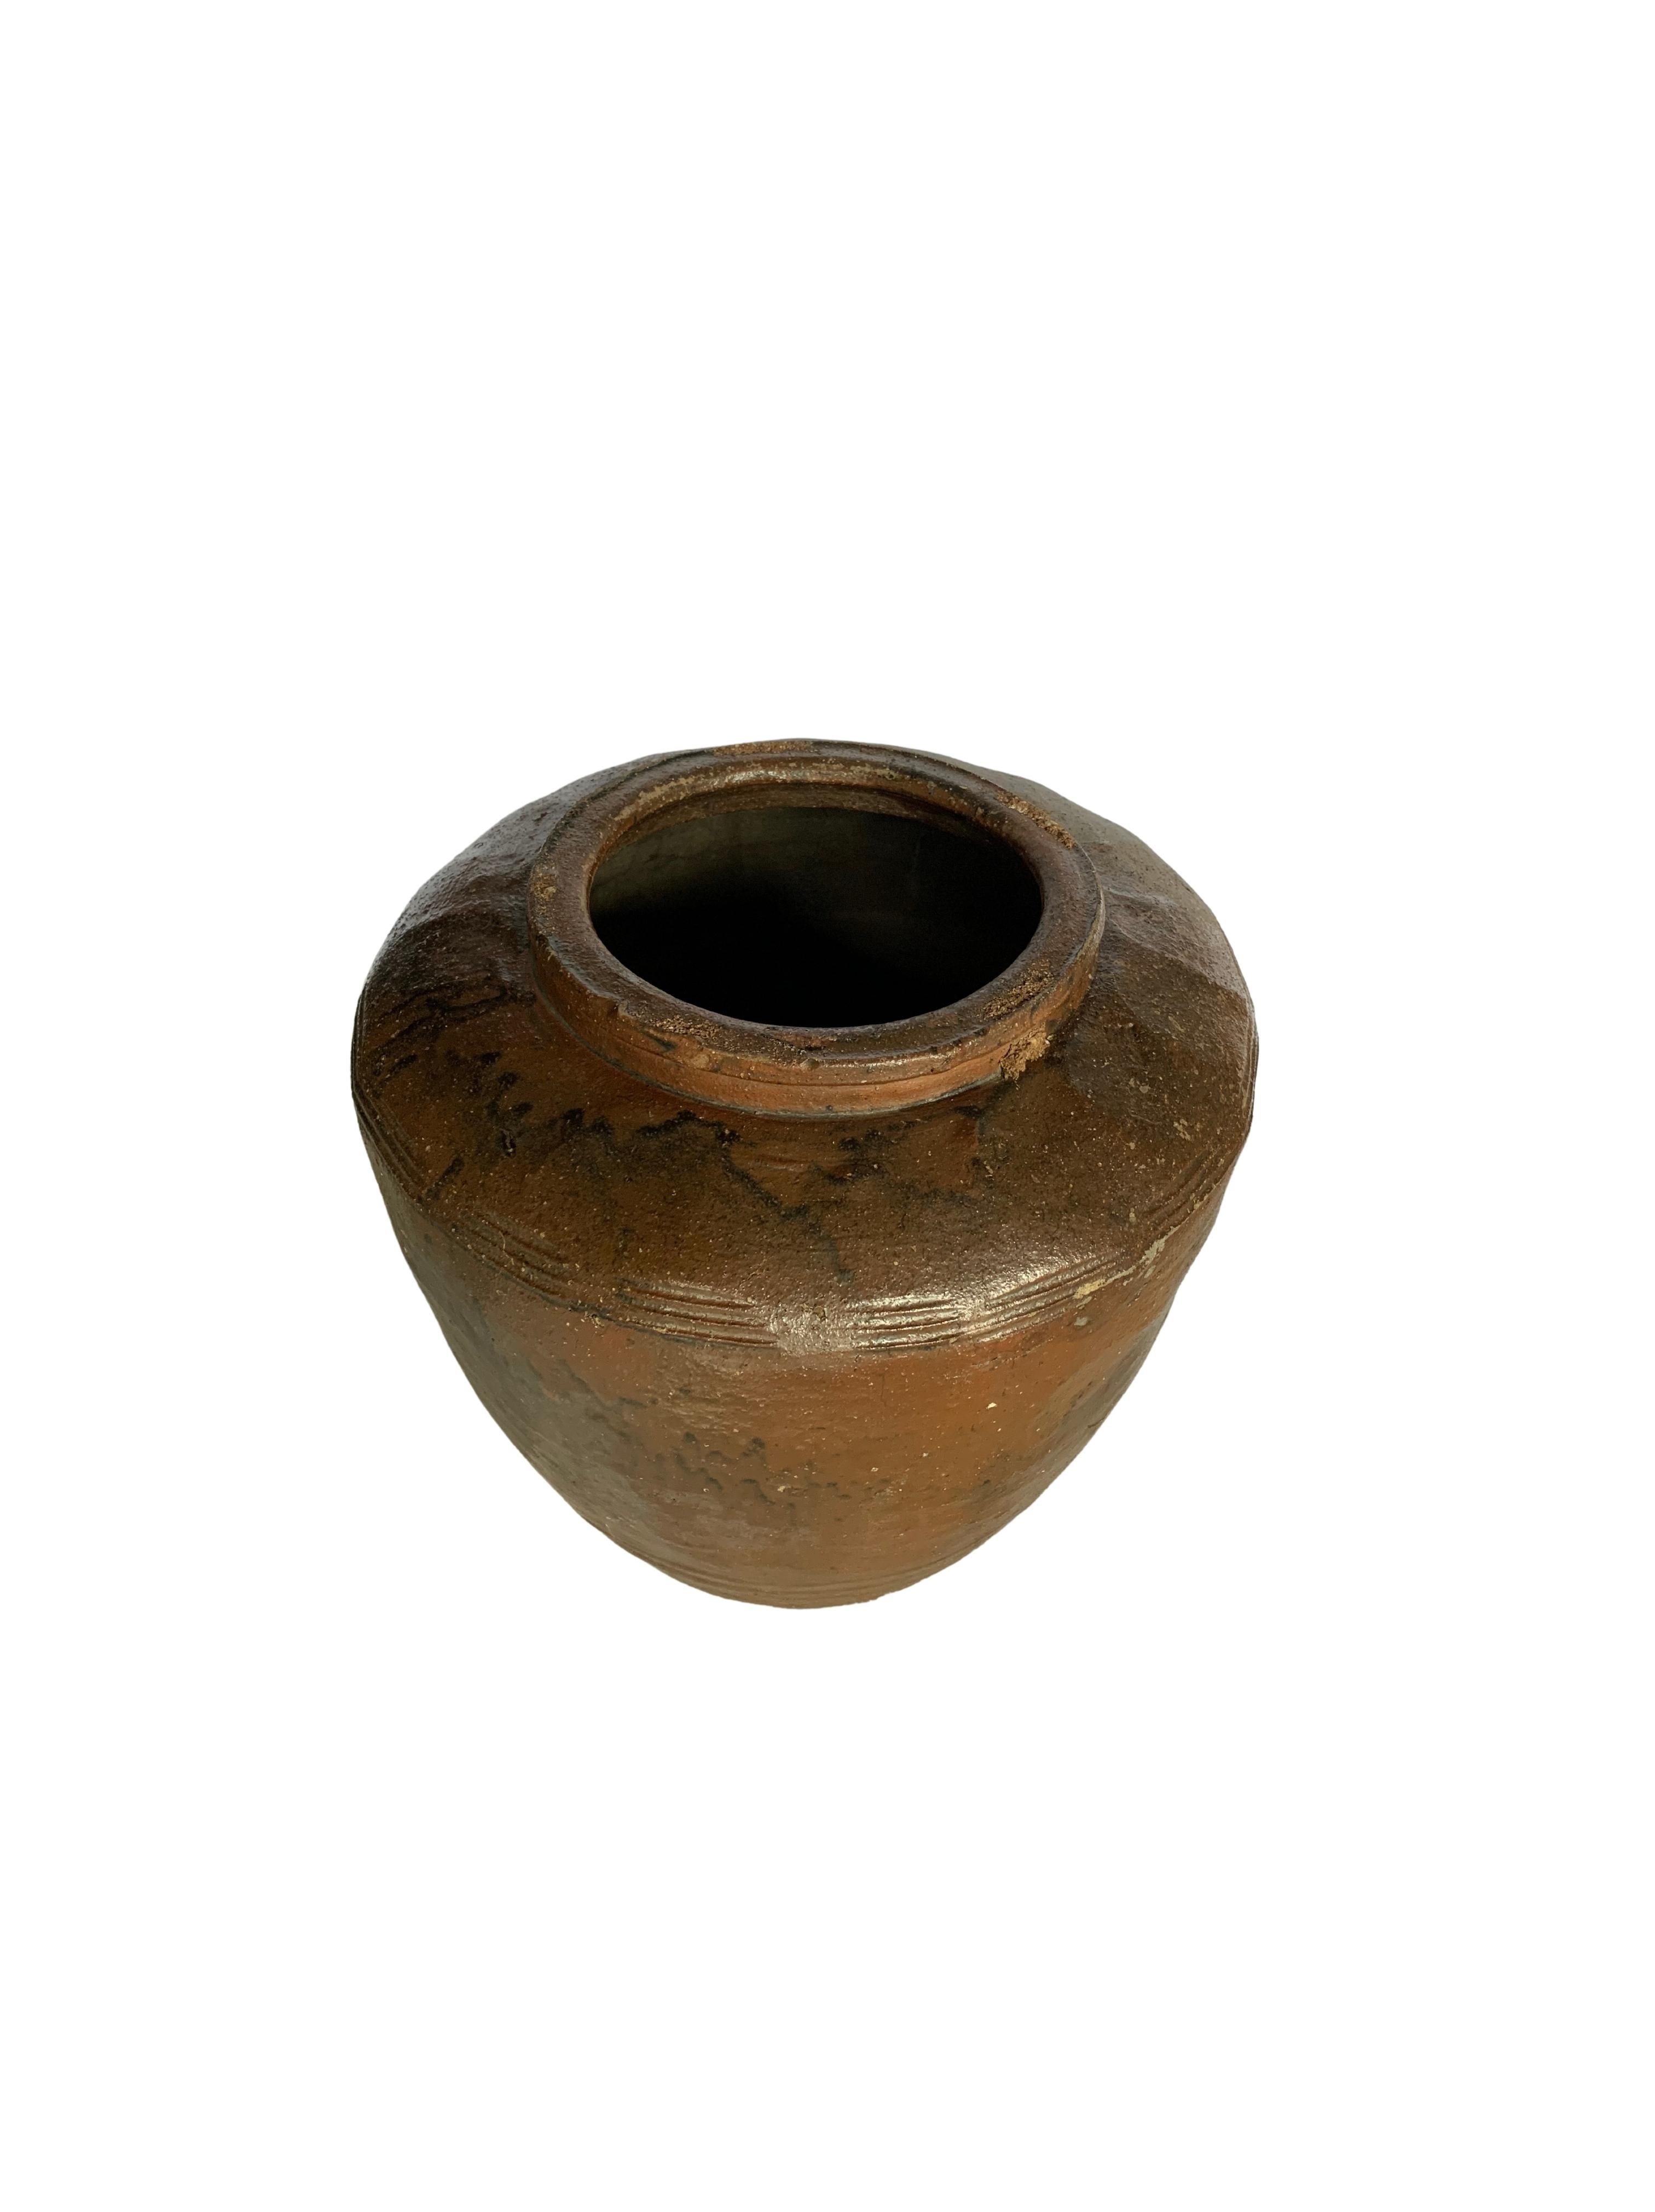 Antique Chinese Brown & Black Glazed Ceramic Salty Egg Jar, c. 1900 In Good Condition For Sale In Jimbaran, Bali